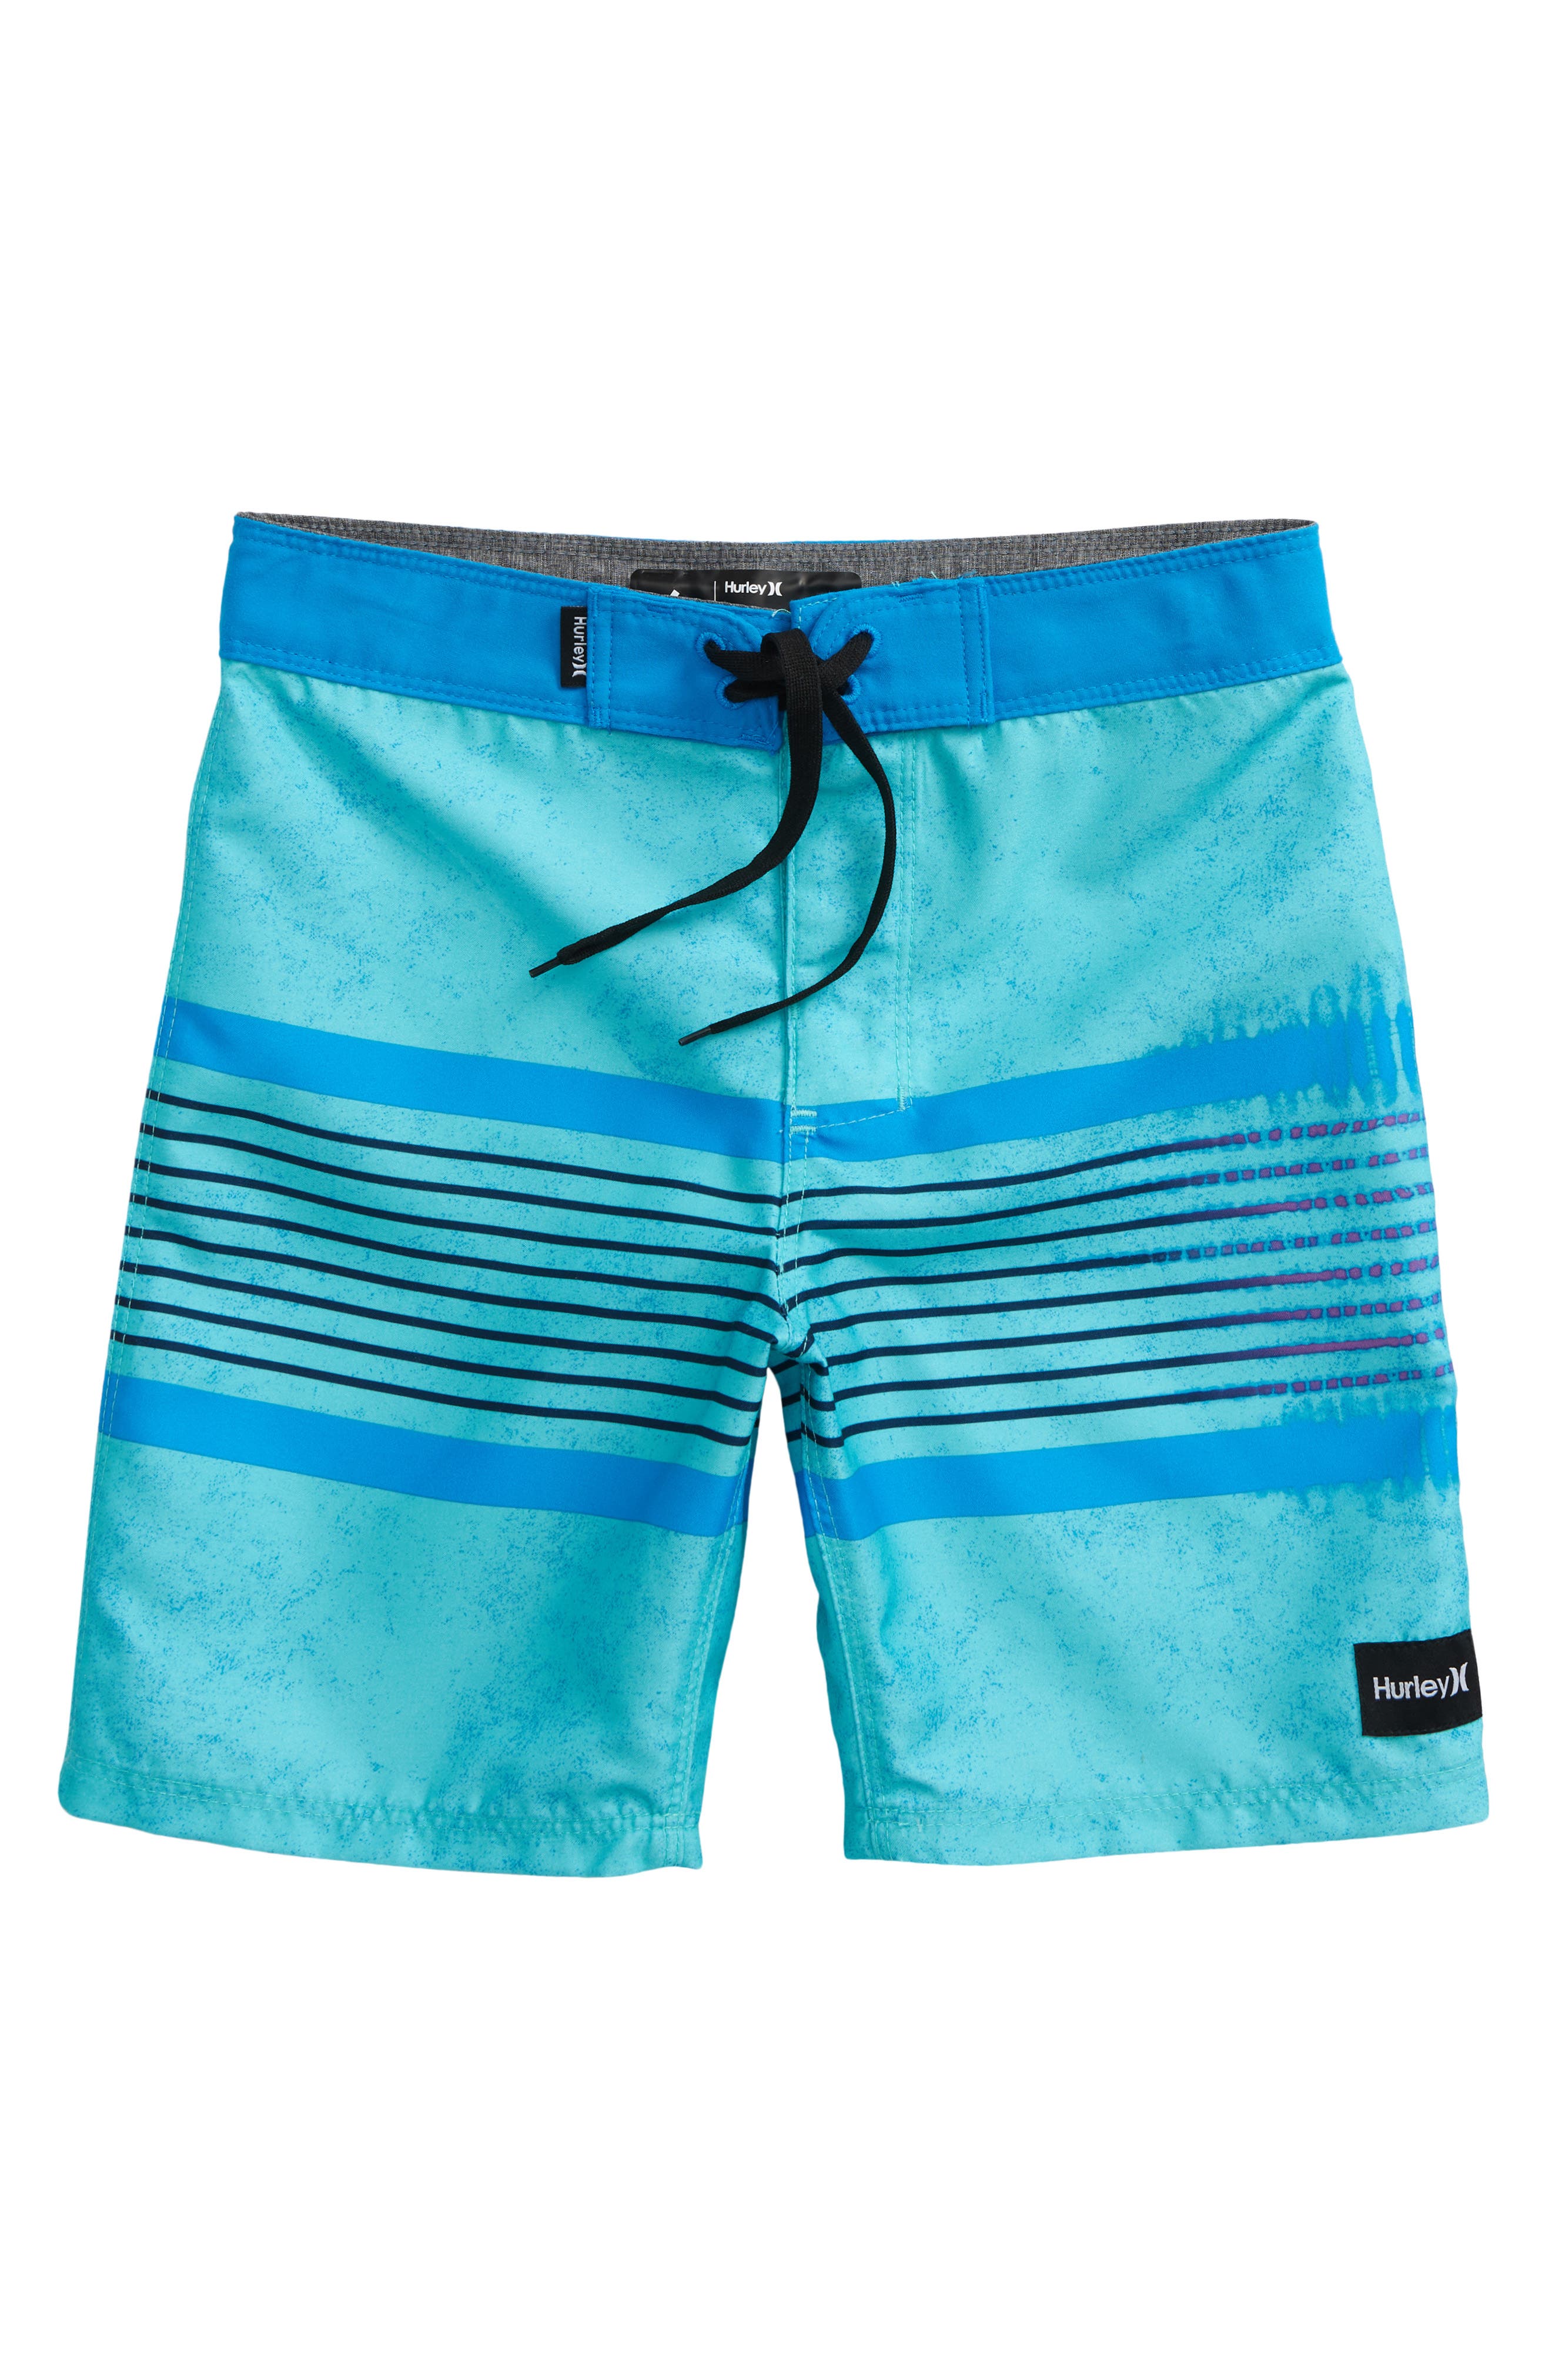 Mens Beach Shorts Palm Trees in Moonlight Solid Board Swimming Trunks Adjustable Board Shorts 